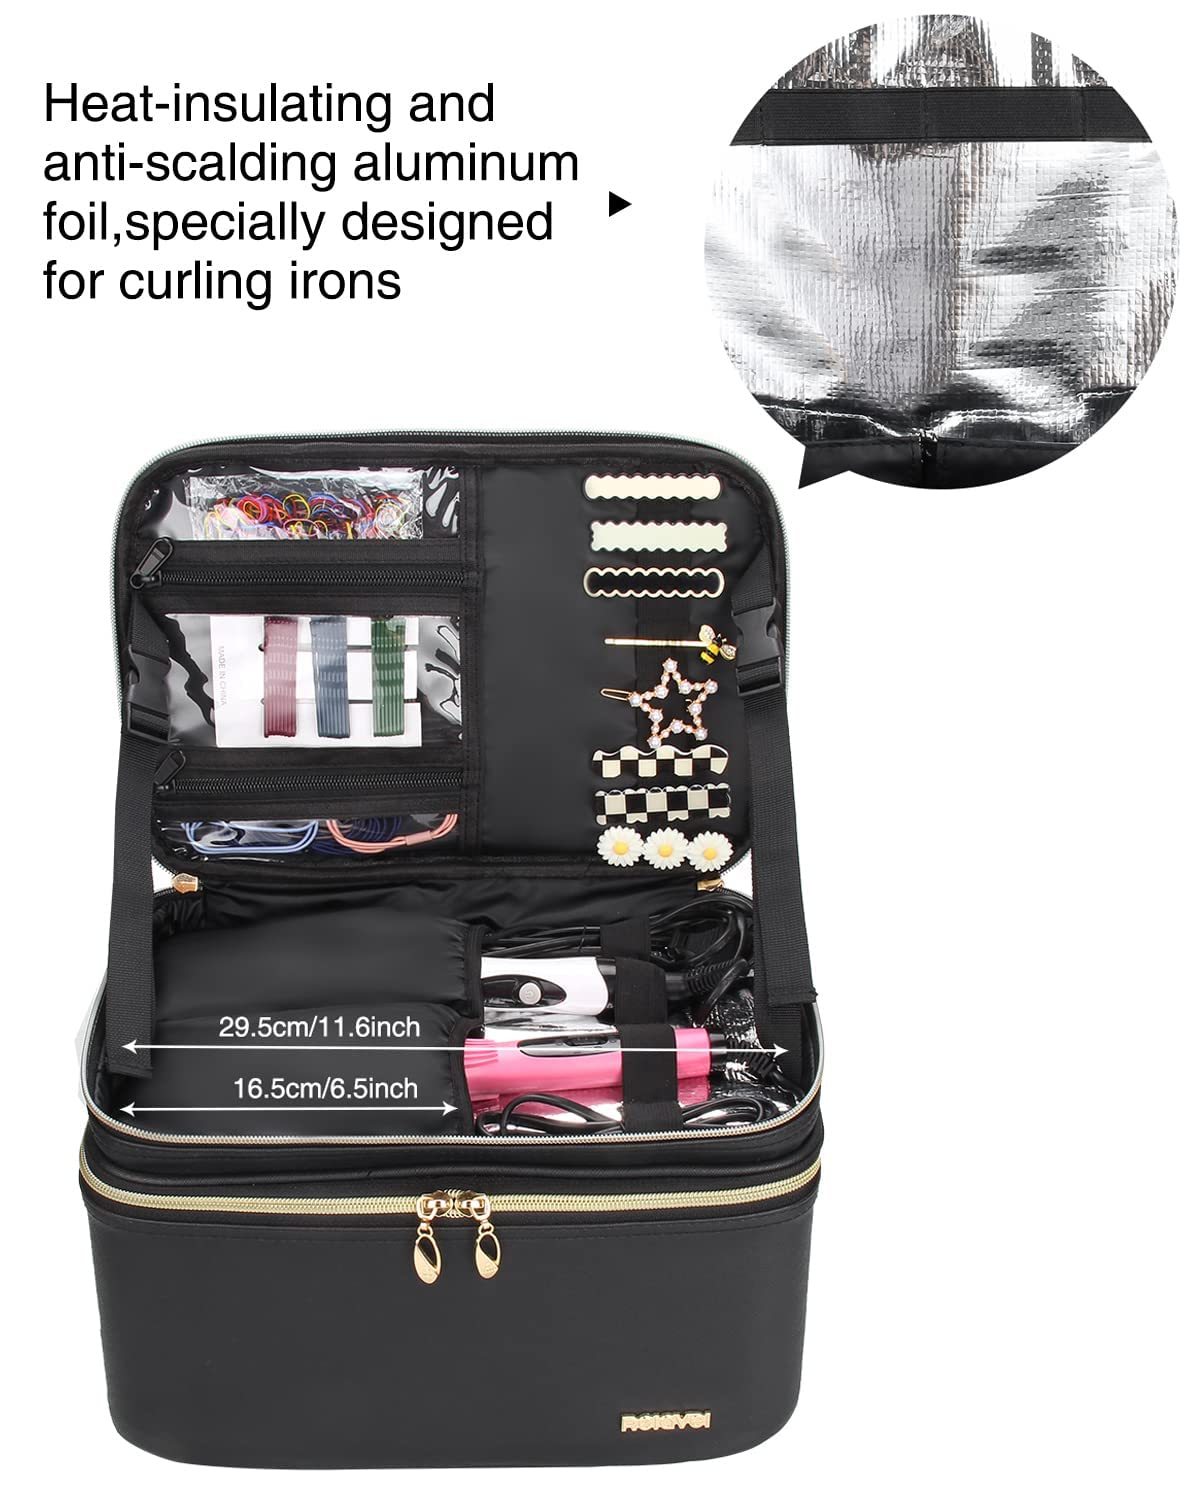 Relavel Makeup Bag Large, Professional Makeup Case Travel Cosmetic Bags Makeup Brush Holder Organizer, Storage Upright Design, Insulated Compartment, Waterproof PU Leather and Lining (Black)